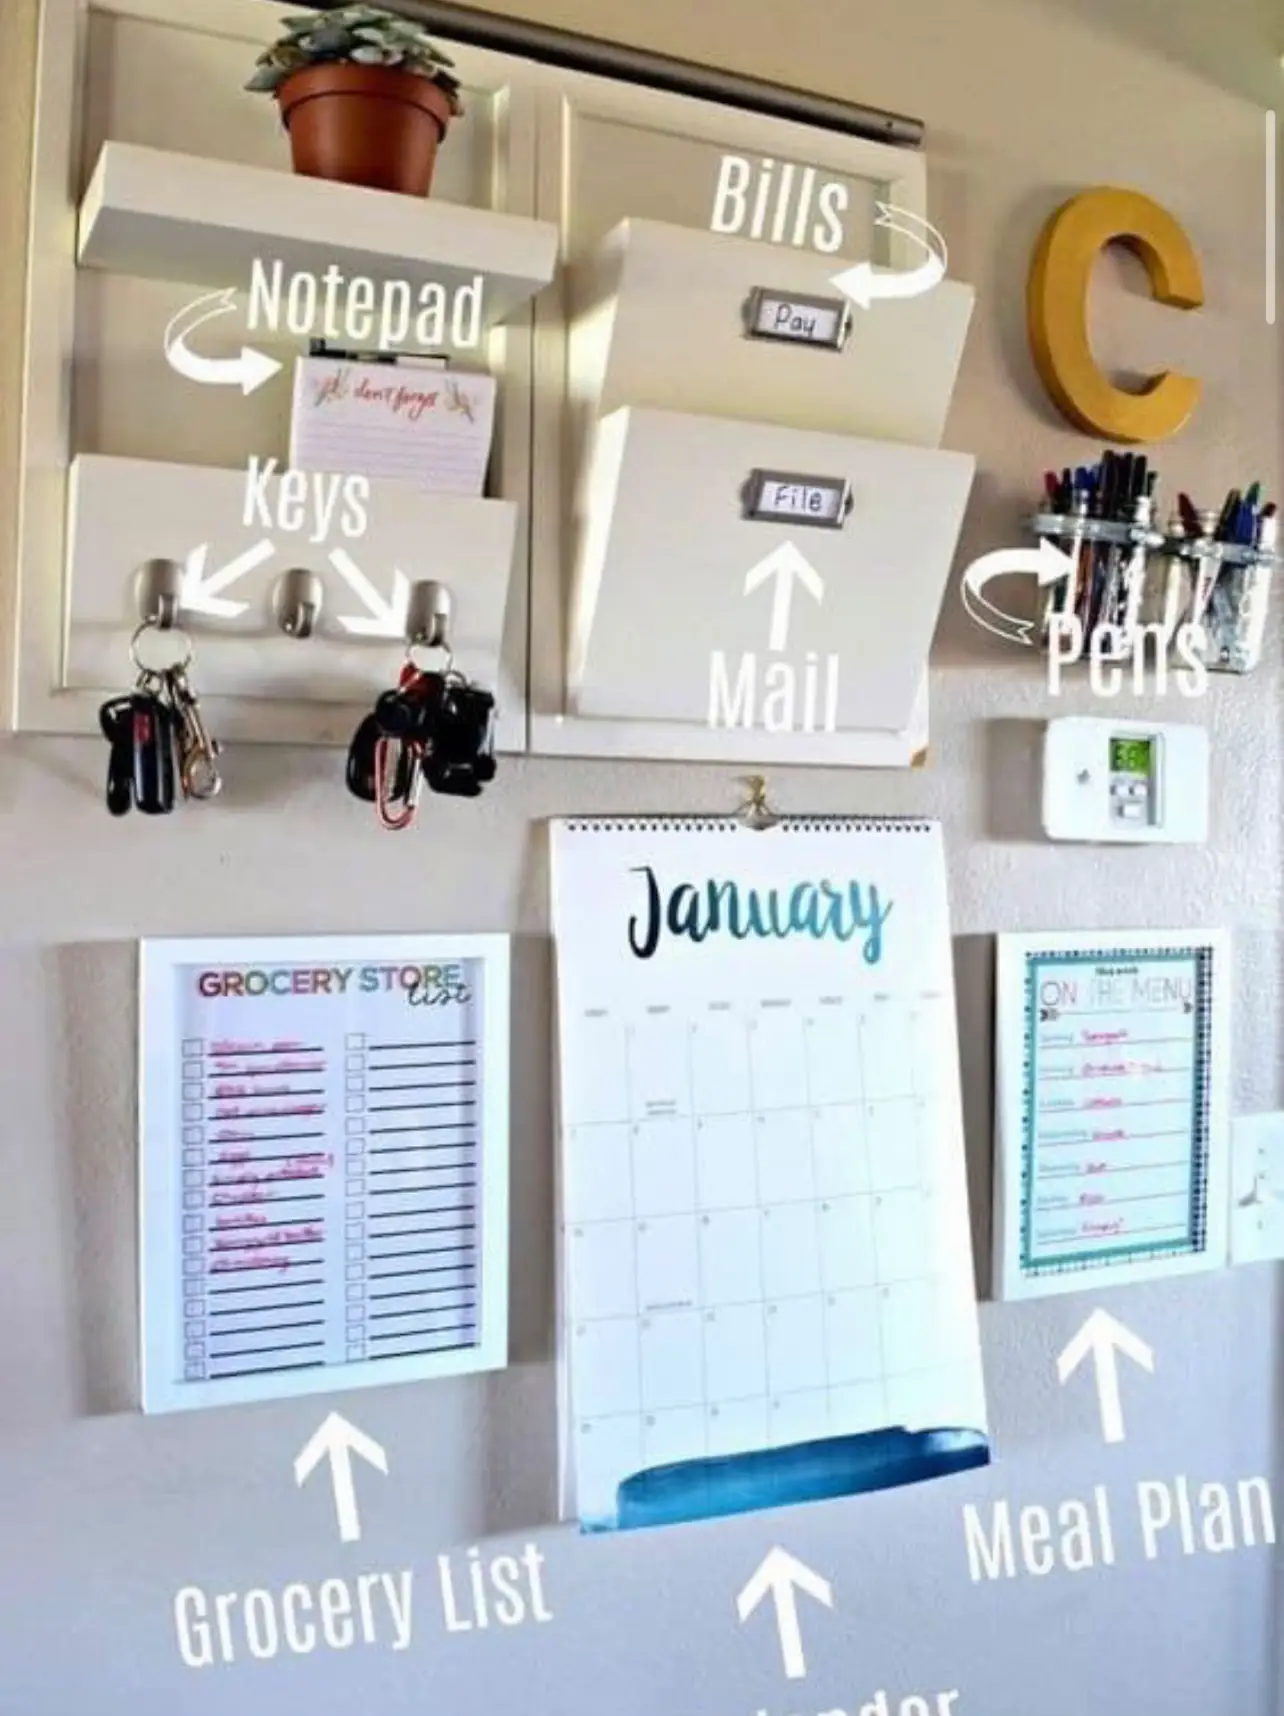  A calendar with a shopping list above it.